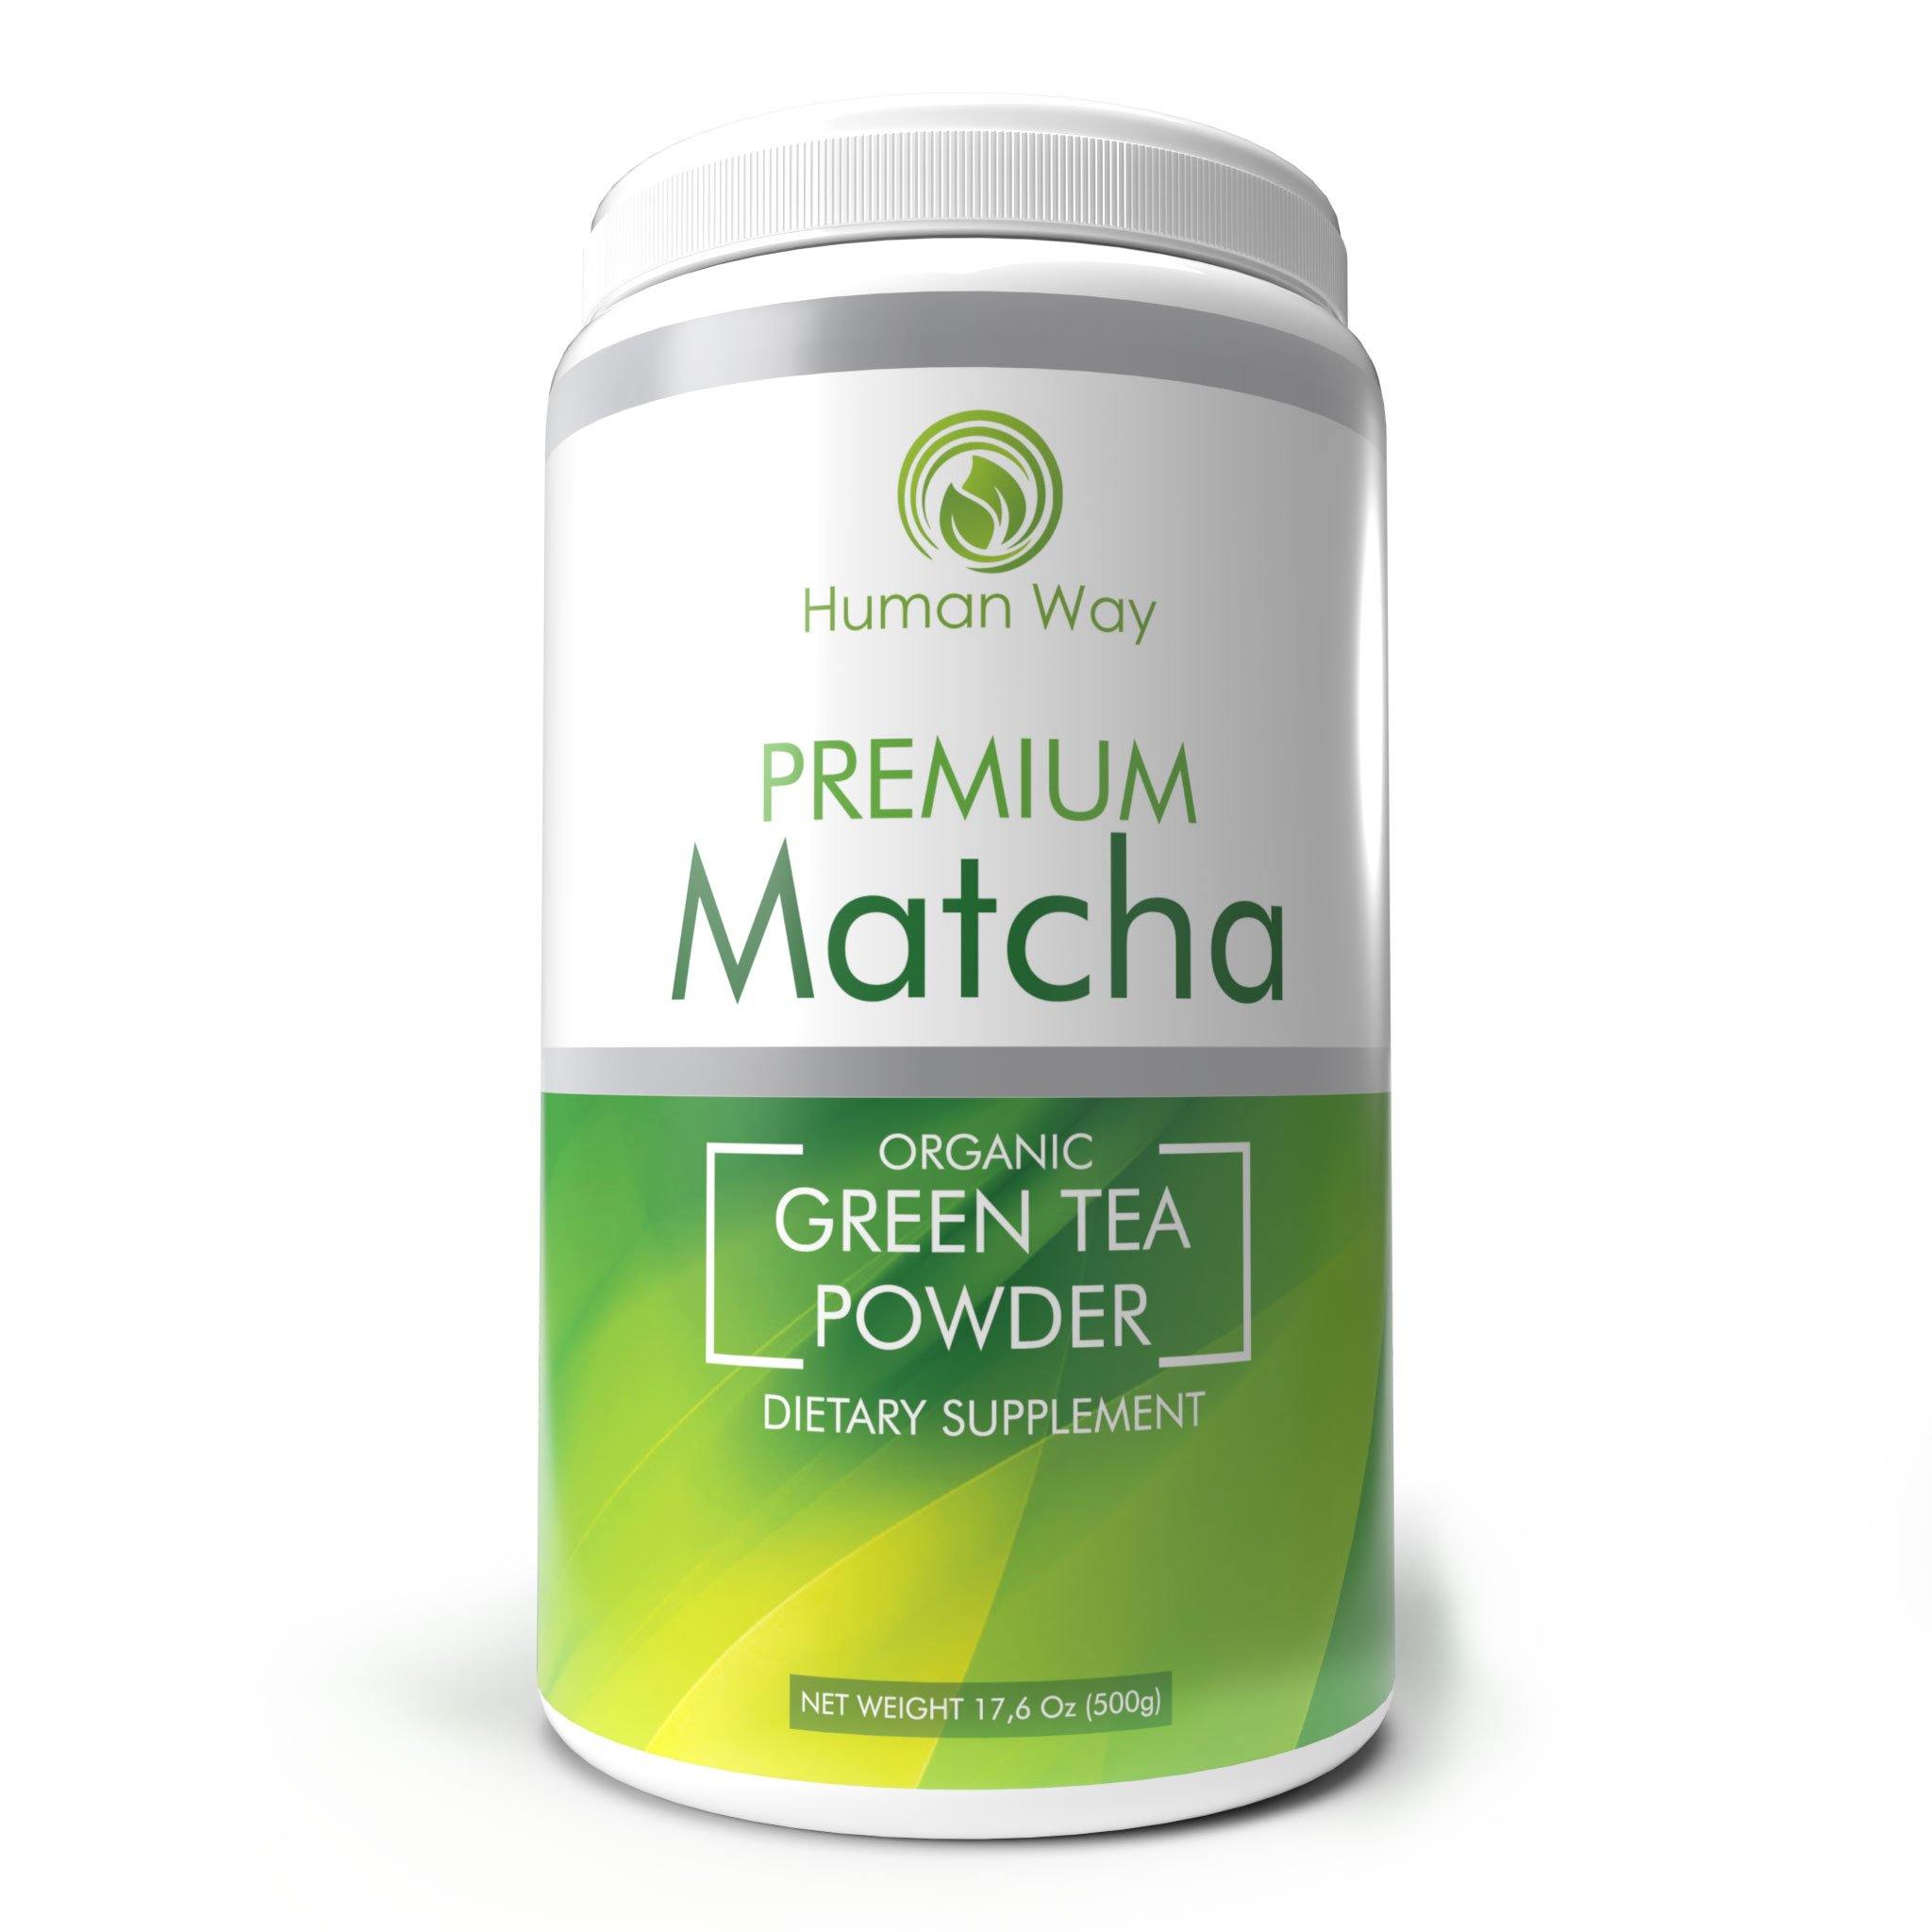 Organic green tea is high in antioxidants and in a catechin,  cancer-fighting effects on the body. Green tea have a variety of health benefits, like helping to prevent heart disease, type 2 diabetes and cancer, and even encouraging weight loss.